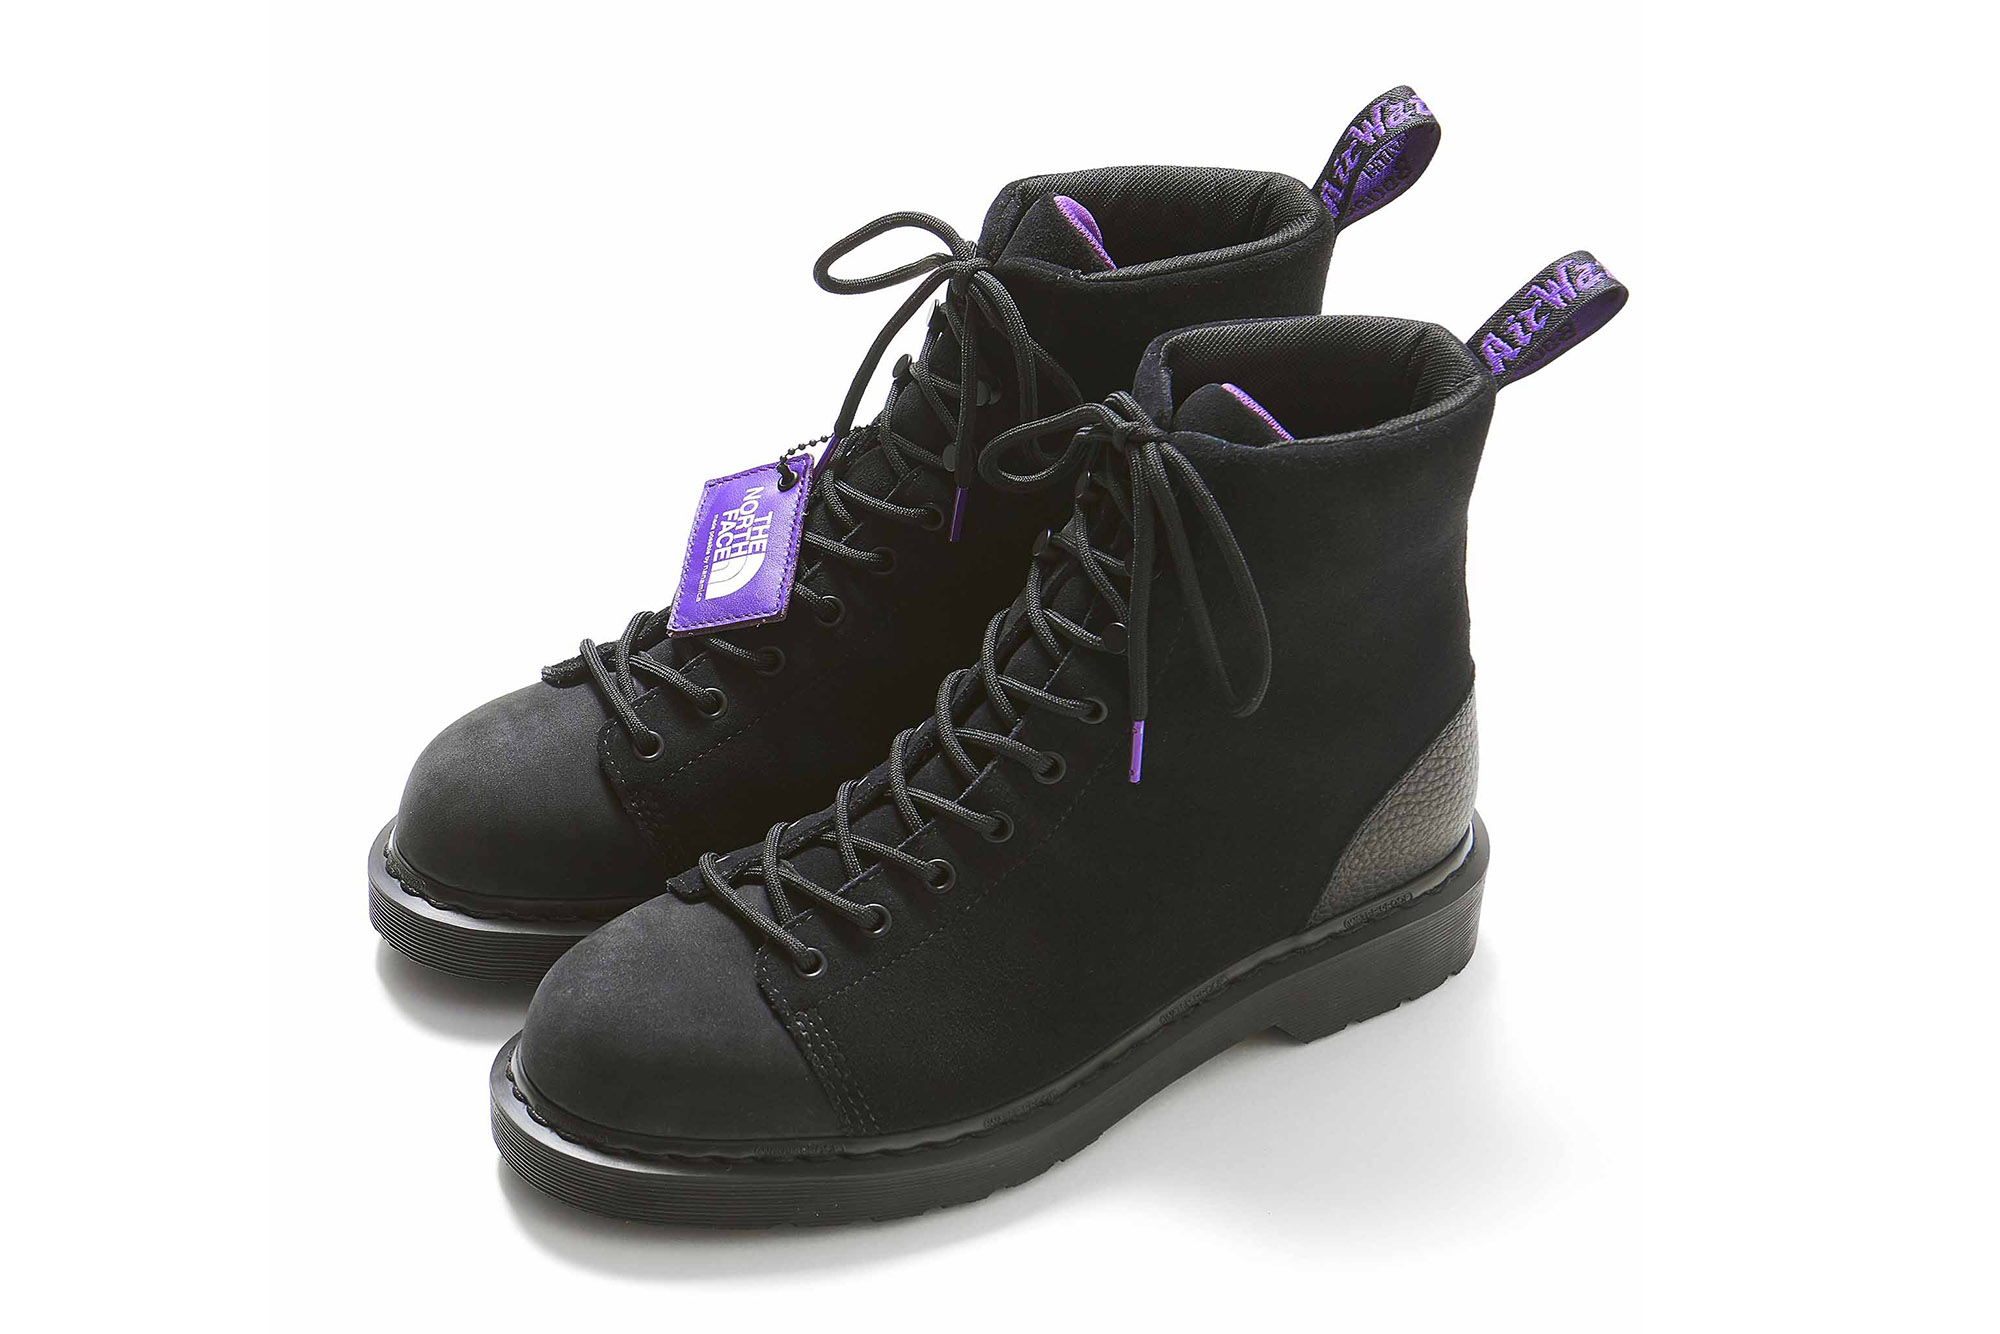 nanamica / THE NORTH FACE PURPLE LABEL in collaboration with Dr 